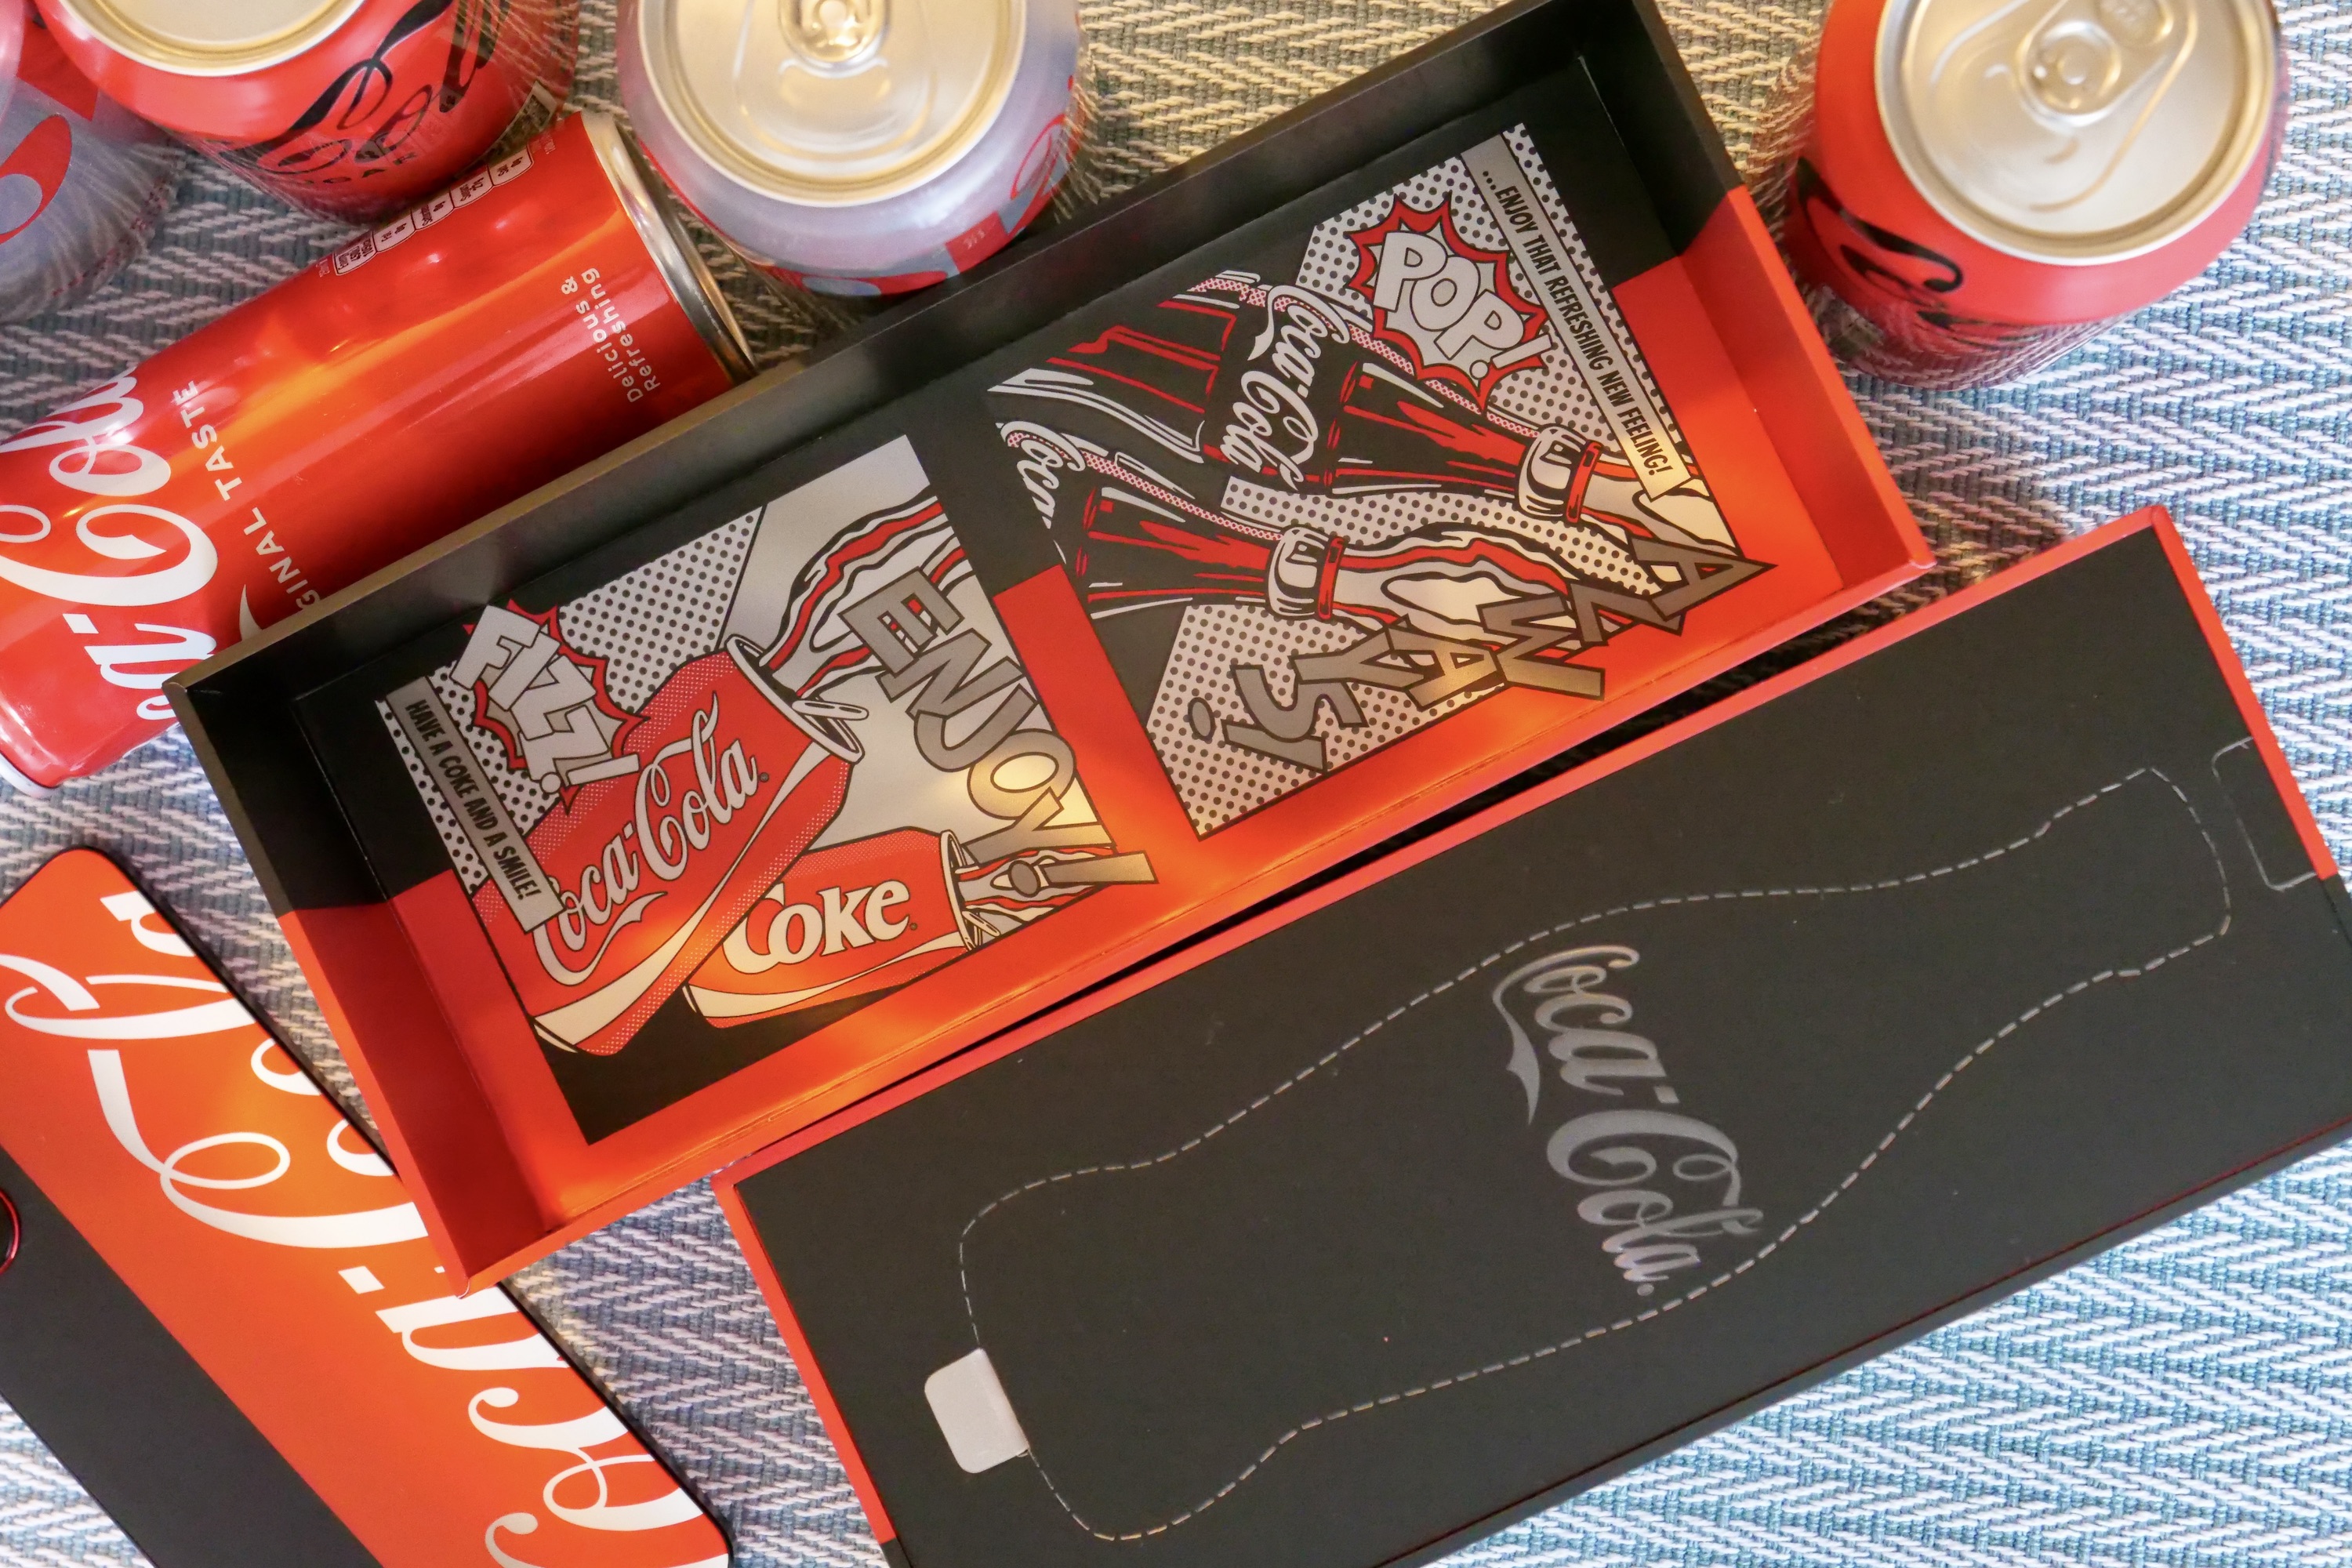 The inside of the themed box containing the Realme X Coca-Cola phone.